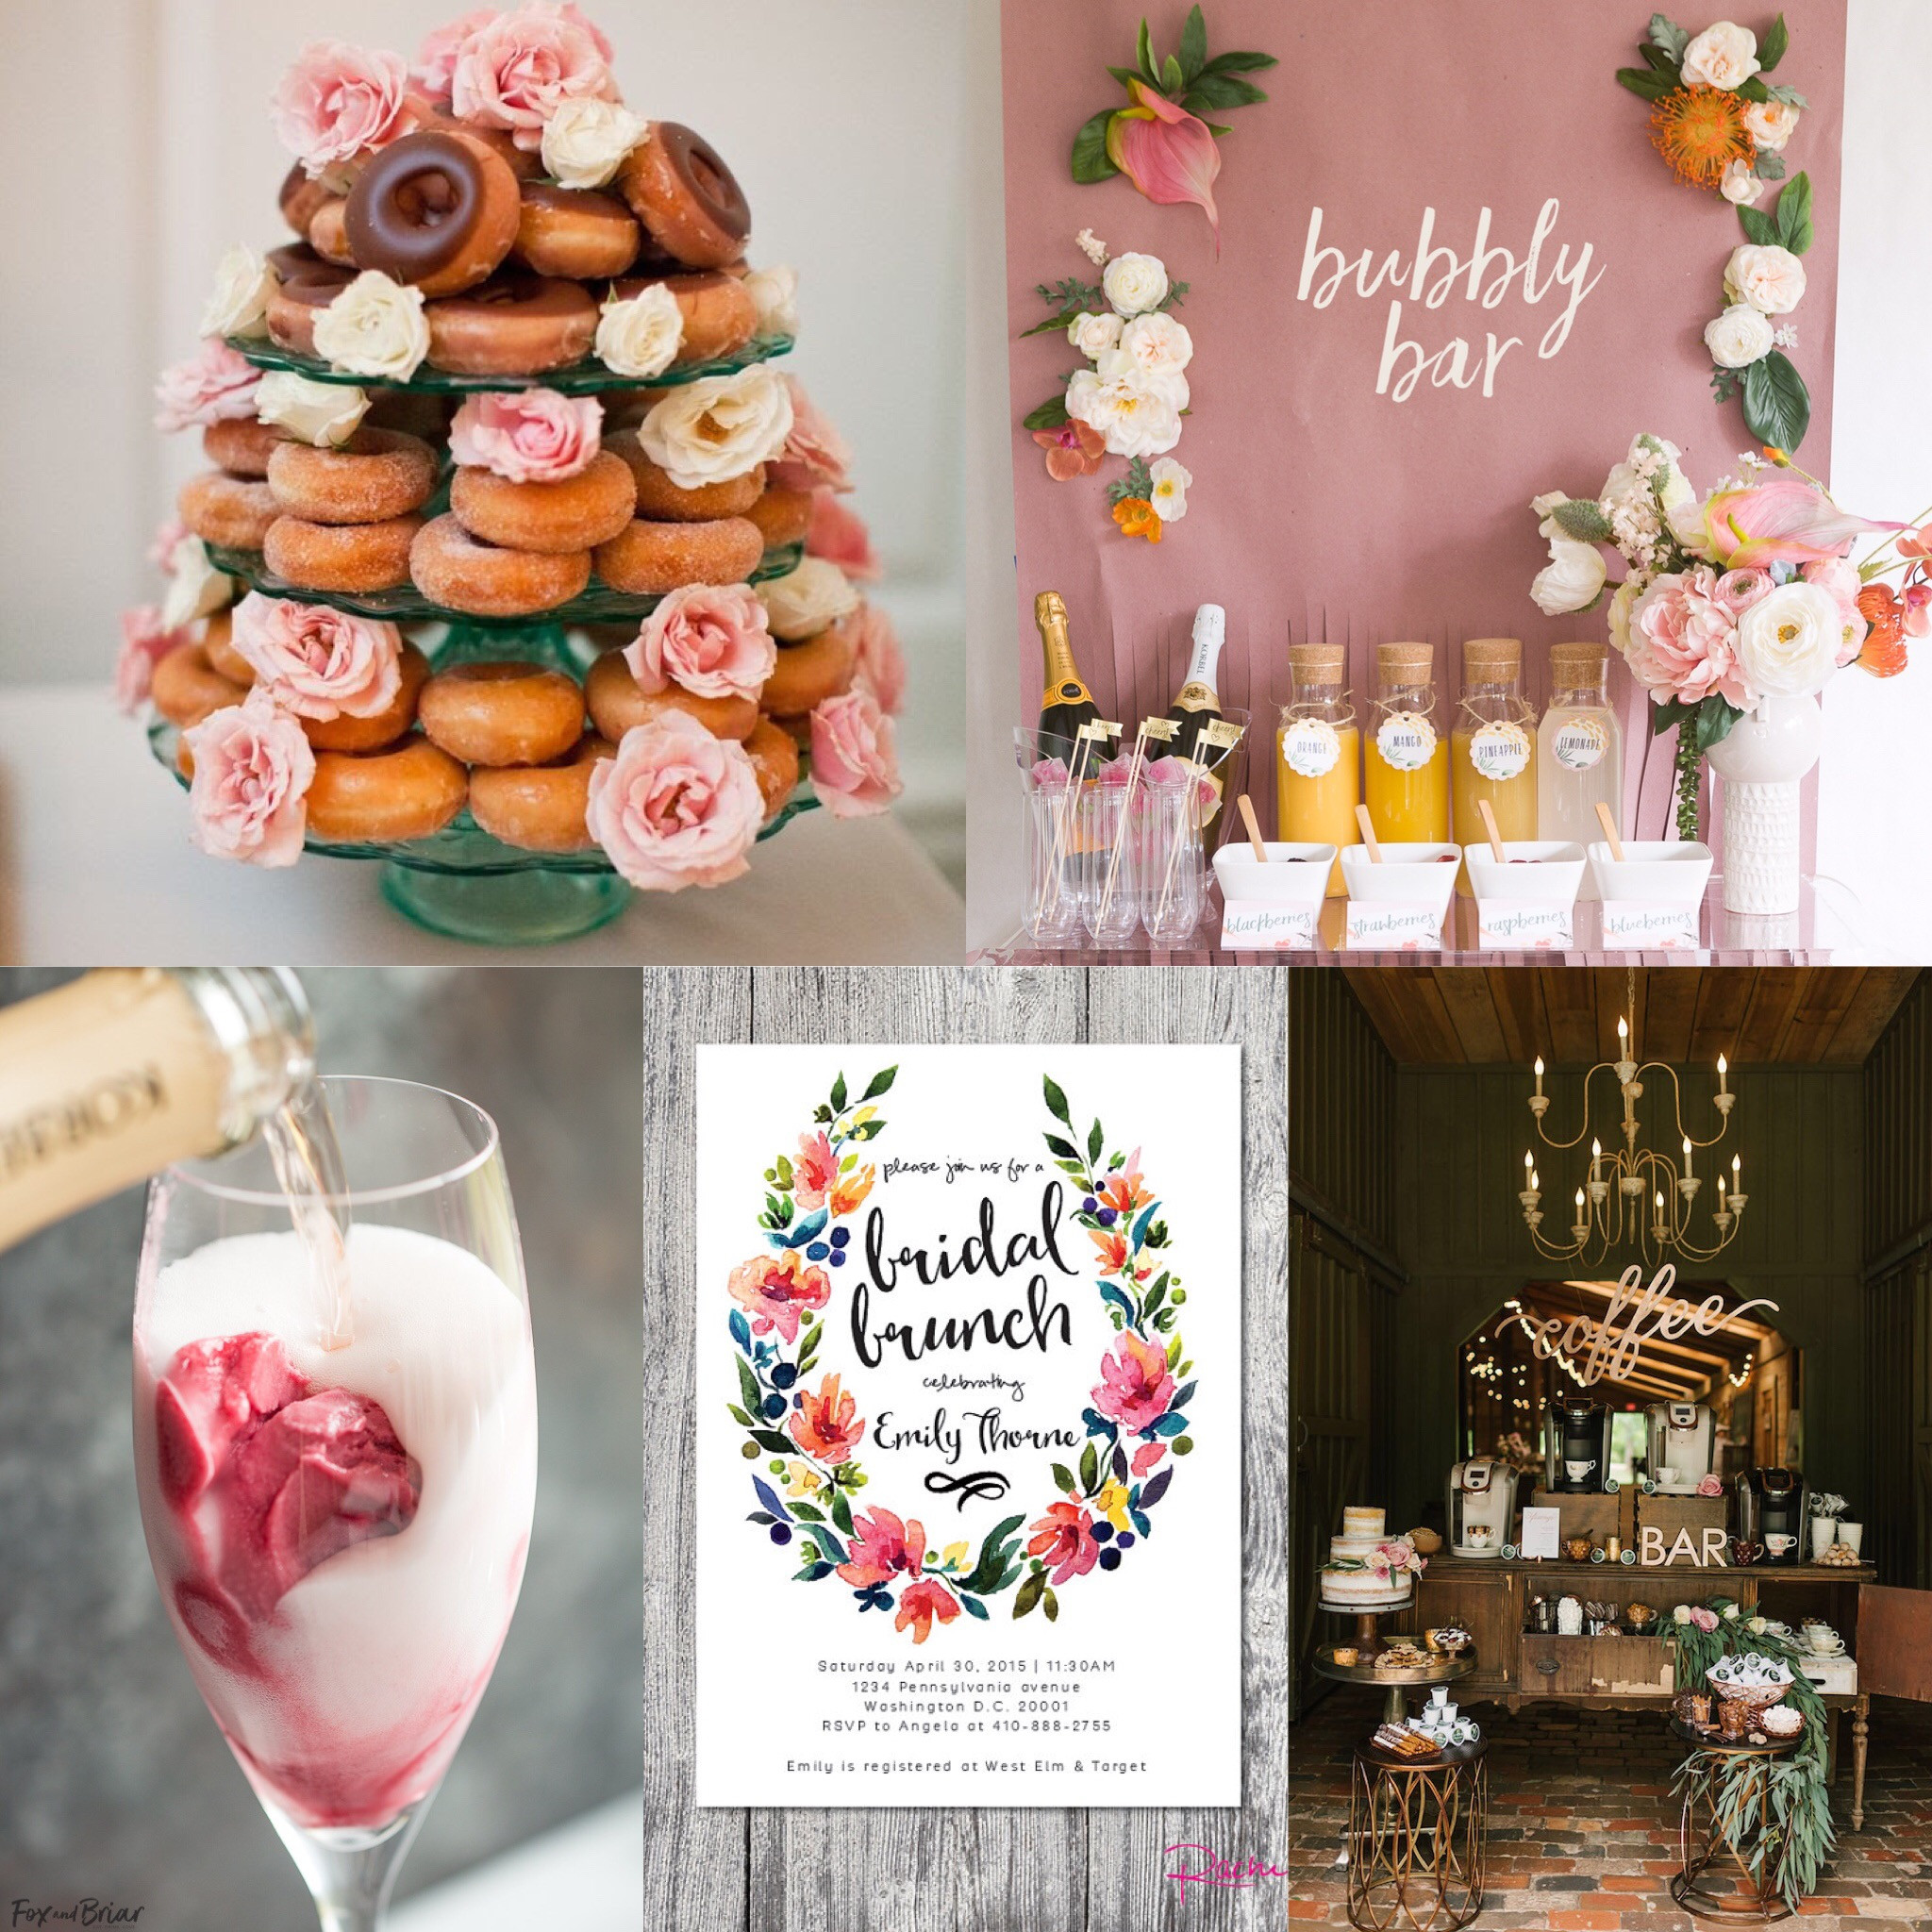 Wedding Shower Ideas And Themes
 Hot Chic Bridal Shower Theme Inspiration From Our Bridal